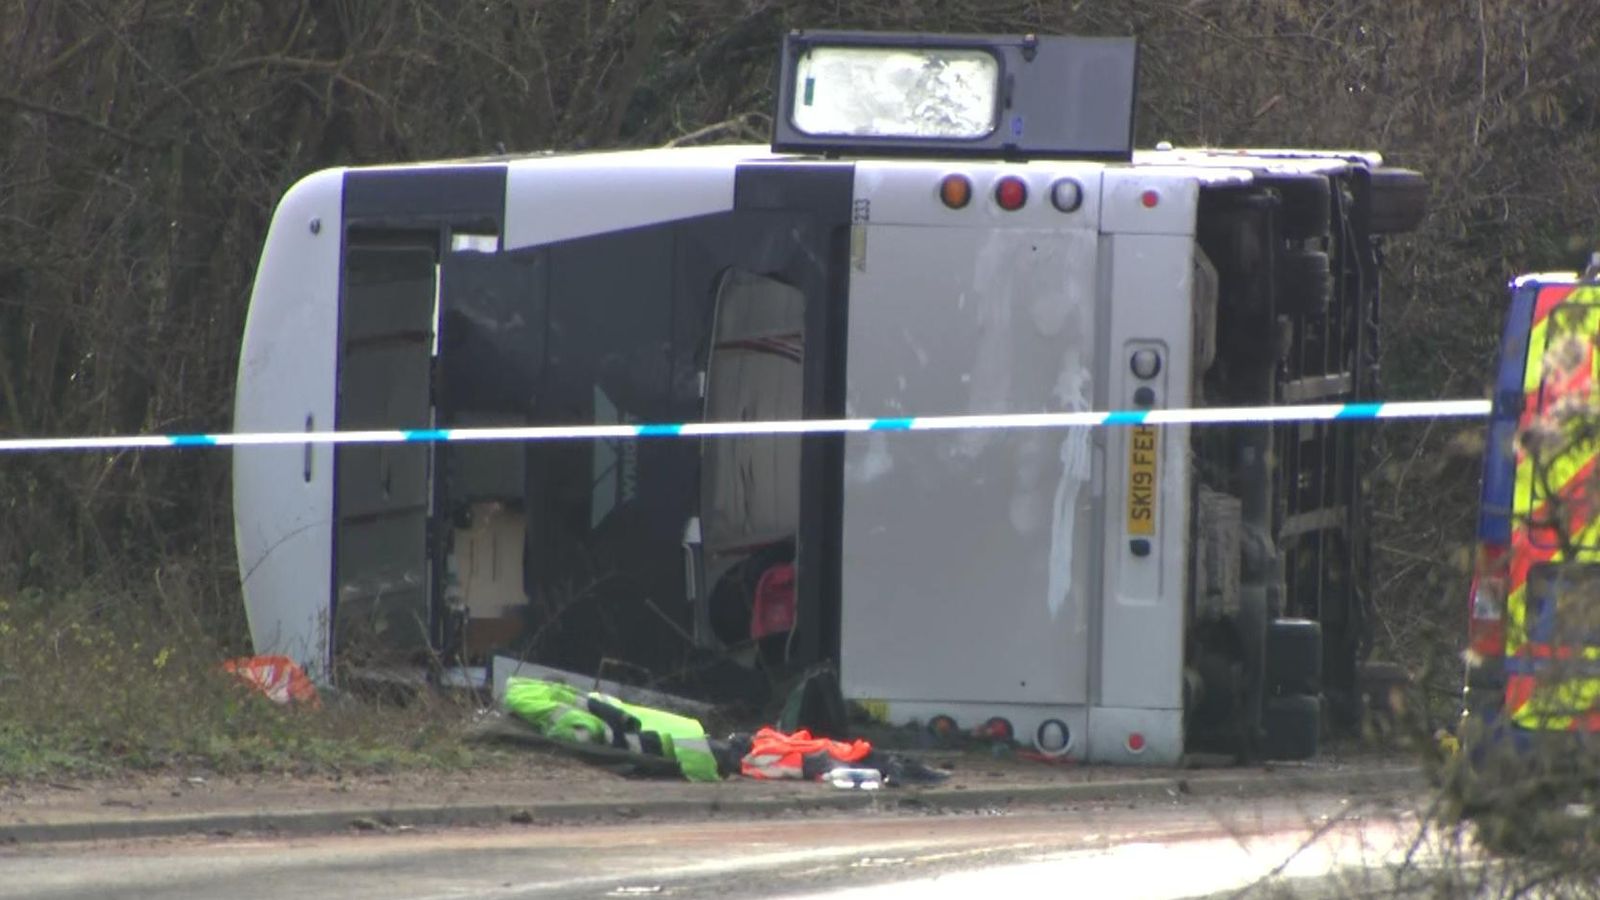 Dozens injured with some in hospital after double-decker bus with 71 on board overturns on A39 Quantock Road in Somerset